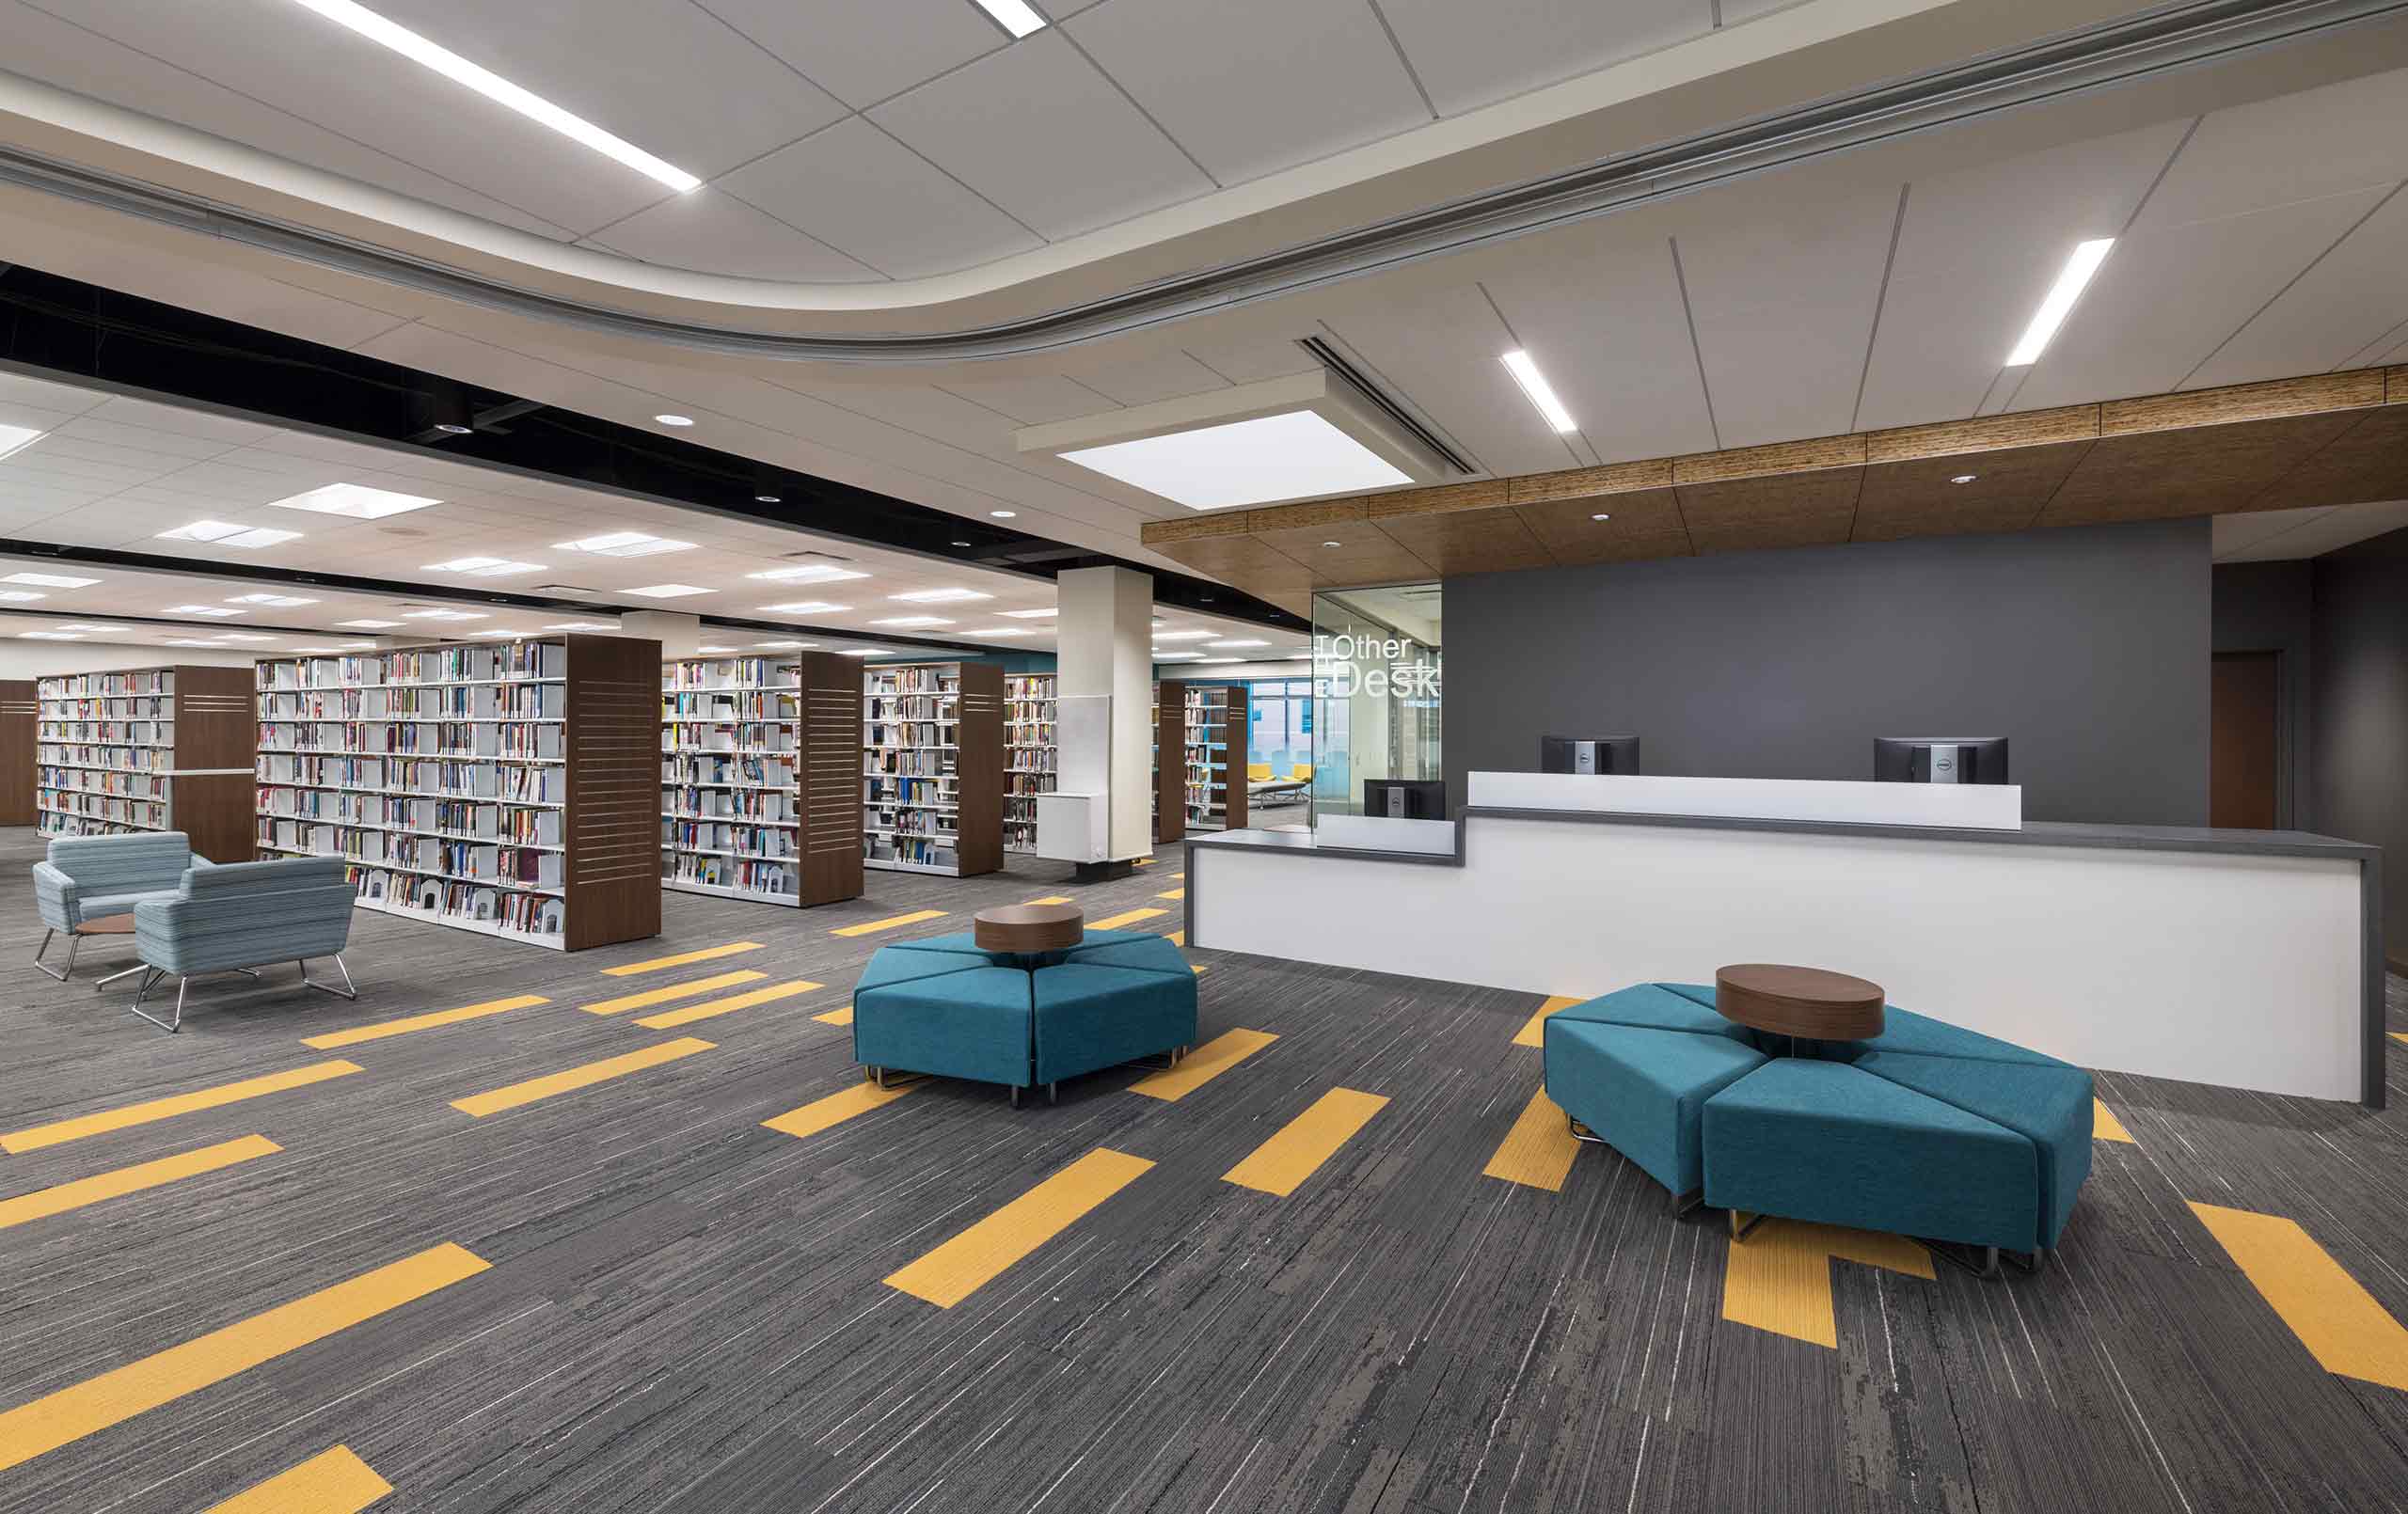 Seating area, bookshelves, and help desk at Harper Library.